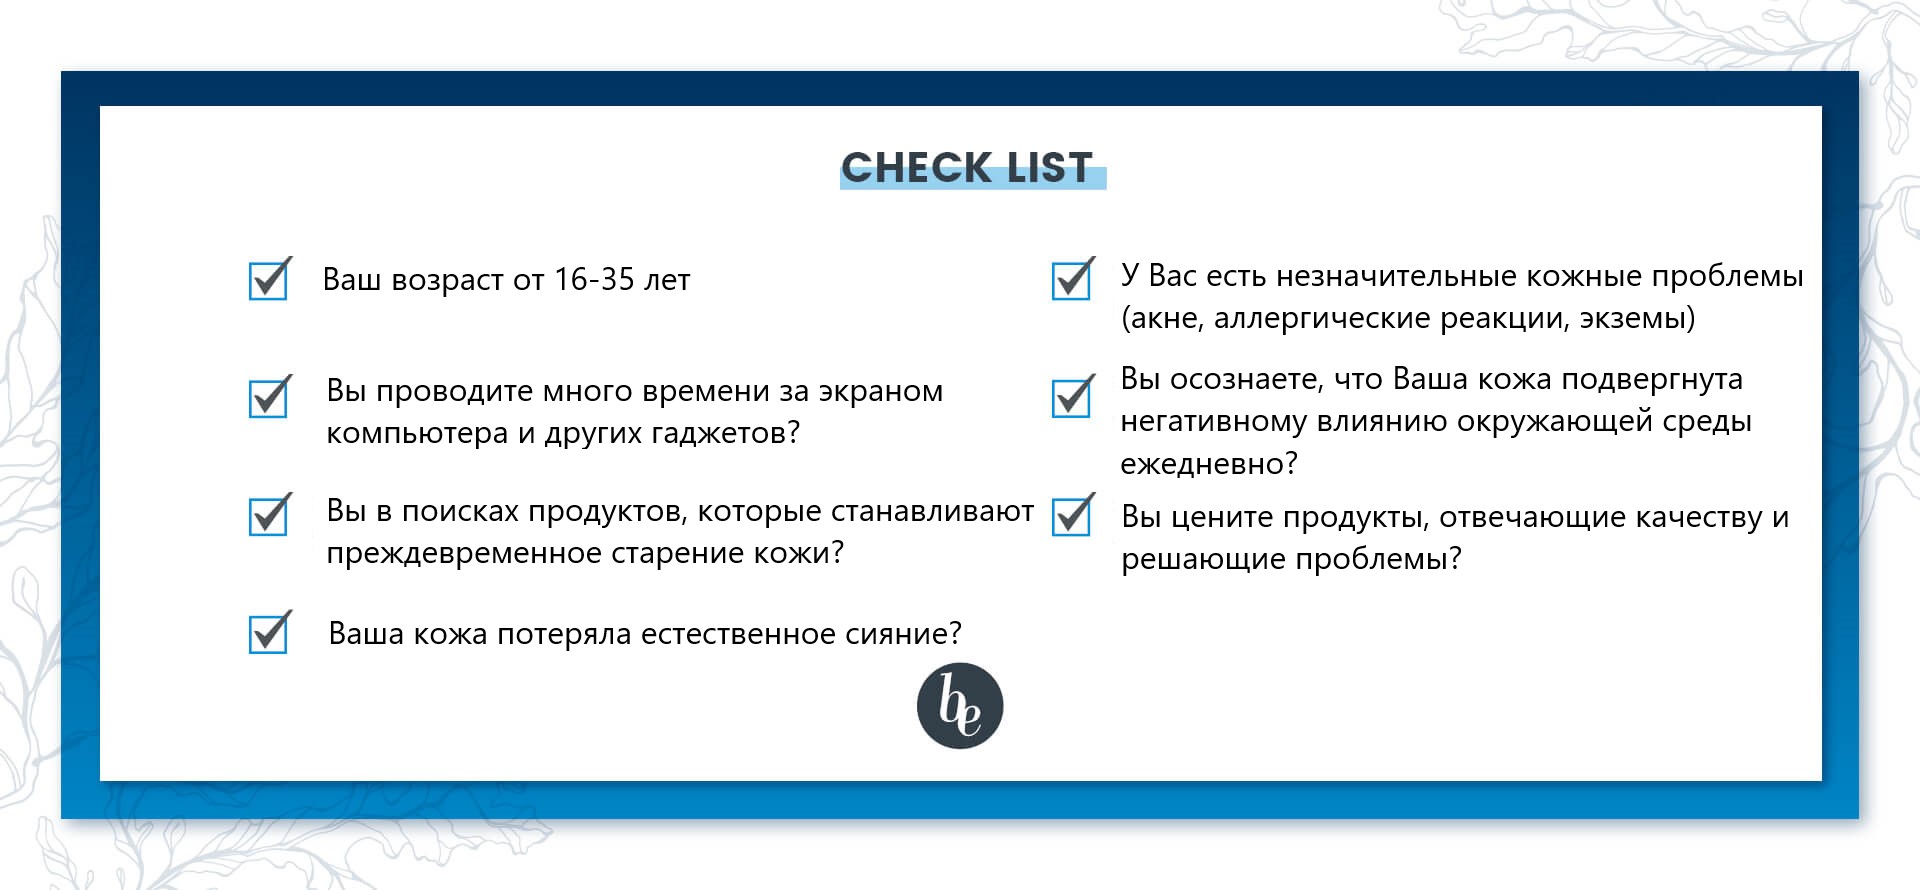 Check list young skin